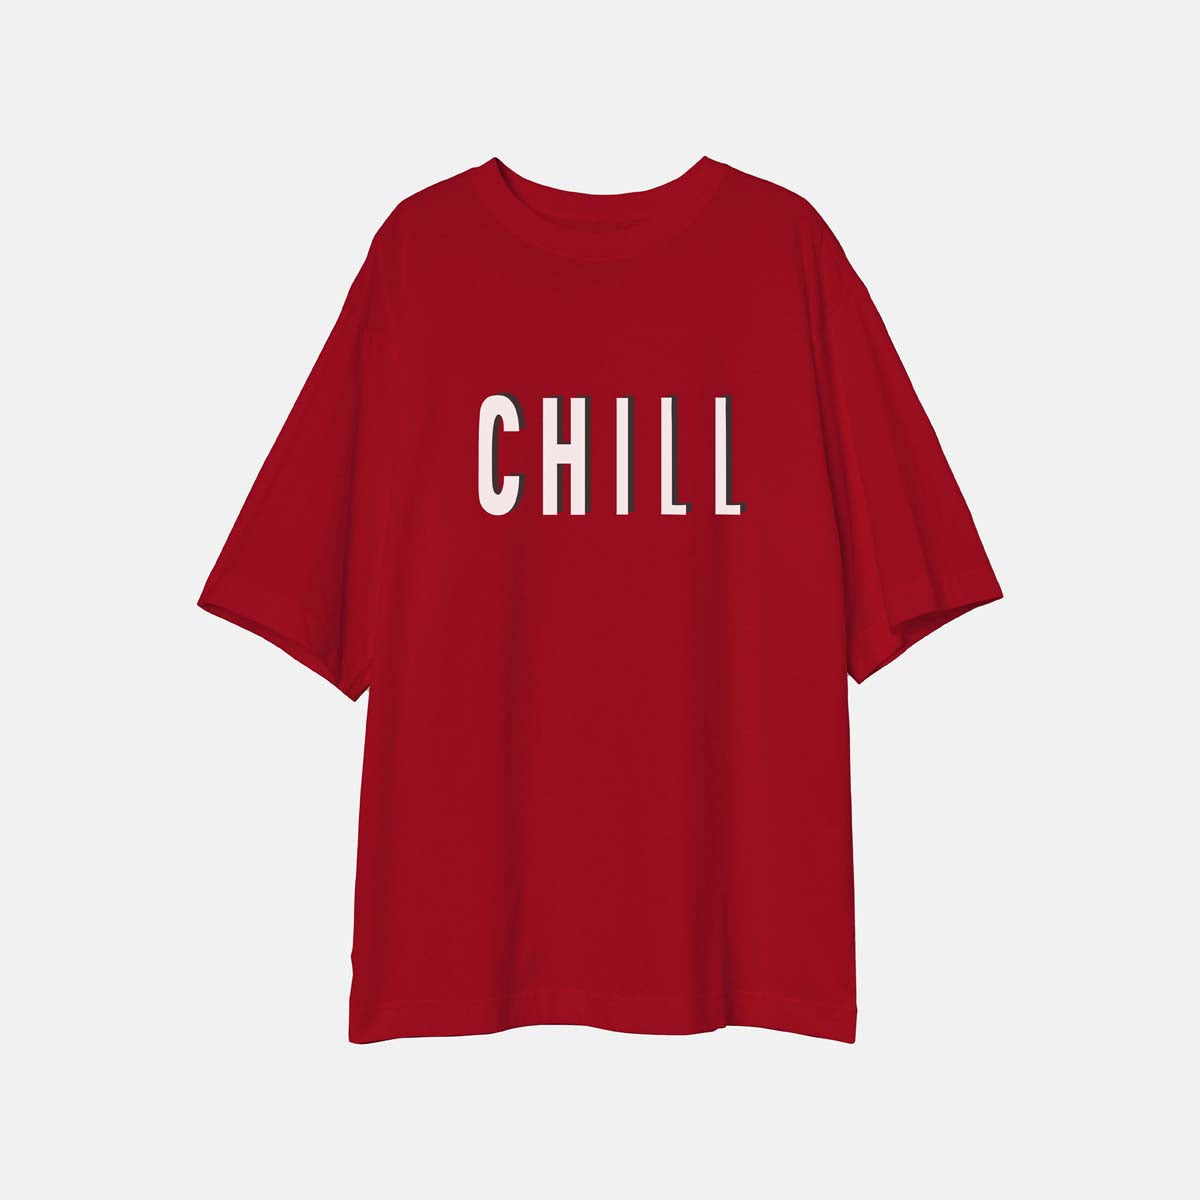 Chill - Printed Oversized Tees